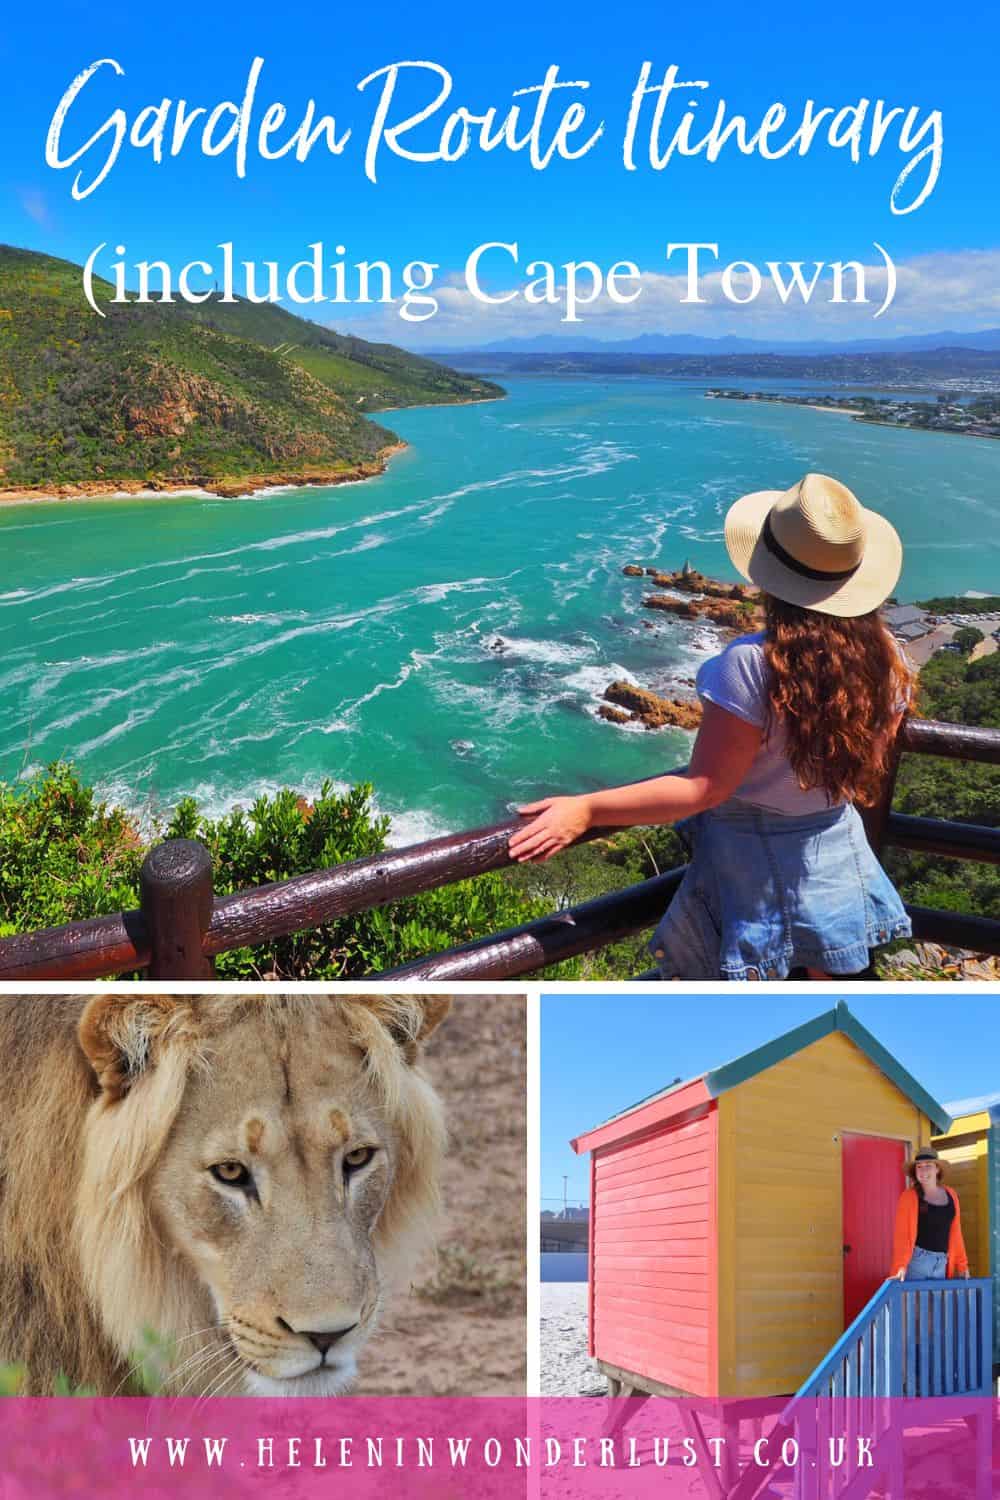 The Perfect Garden Route & Cape Town Itinerary